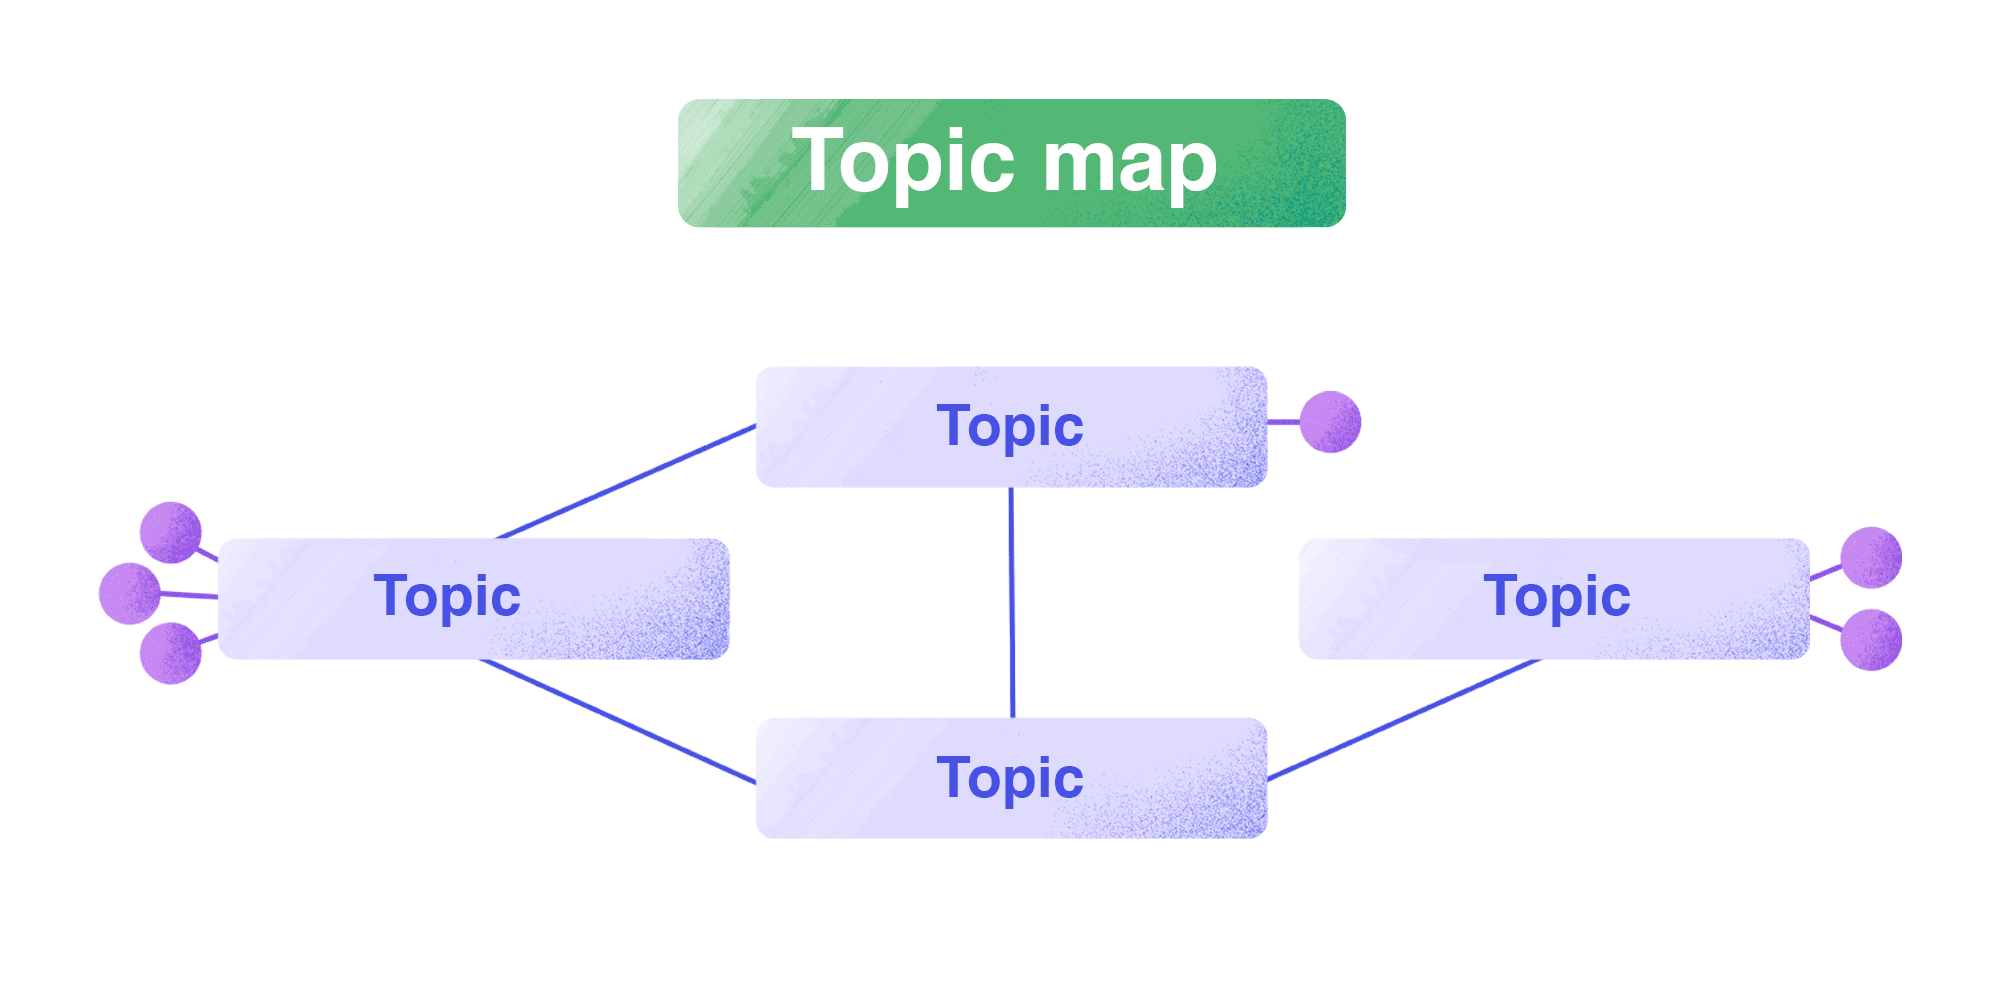 Topic mapping